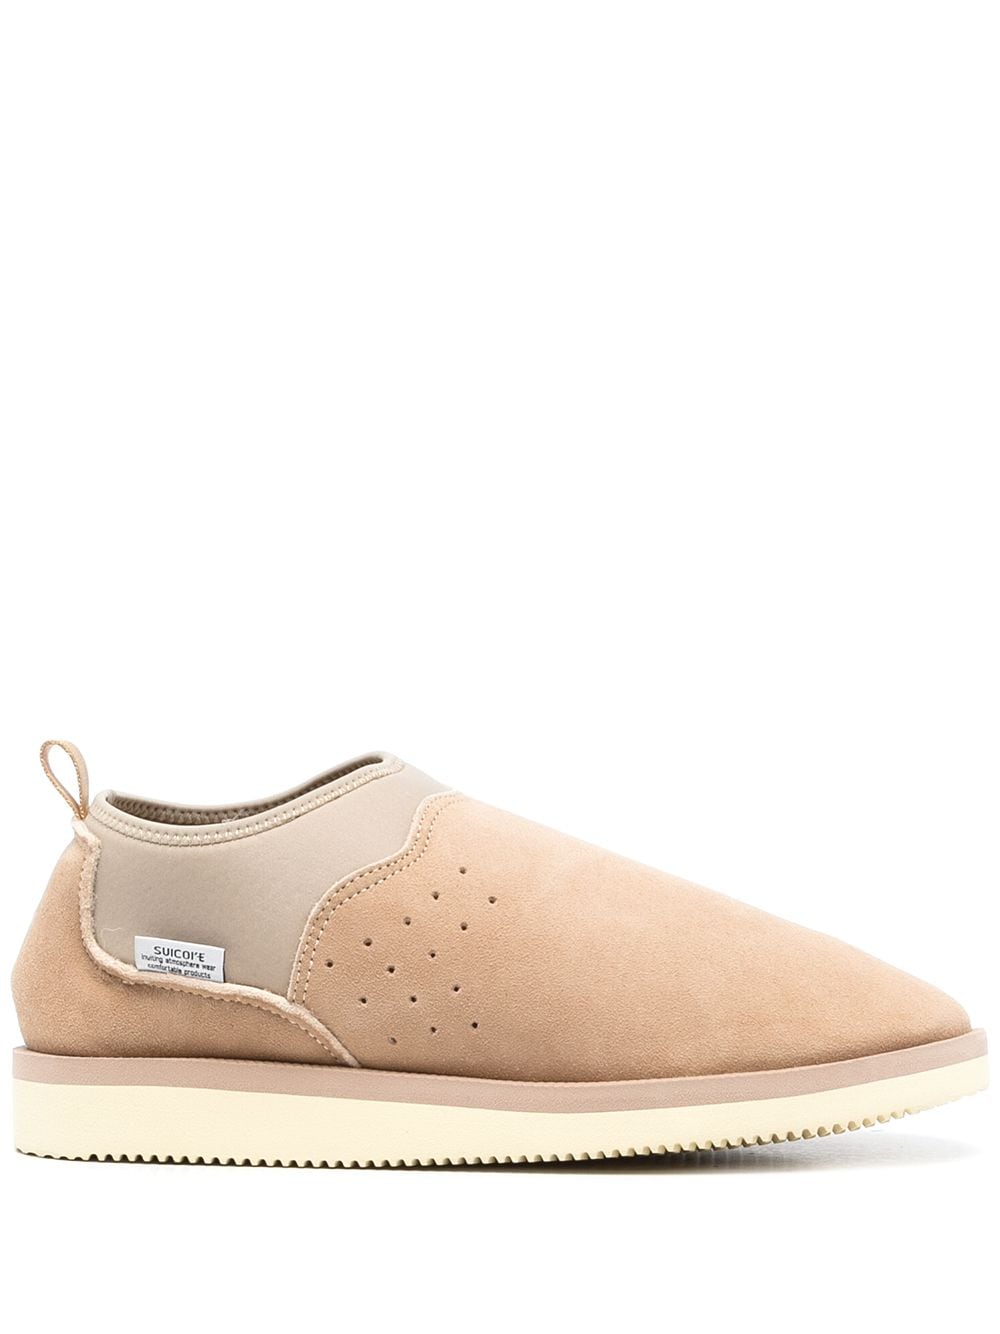 Suicoke Ron suede slippers - Brown